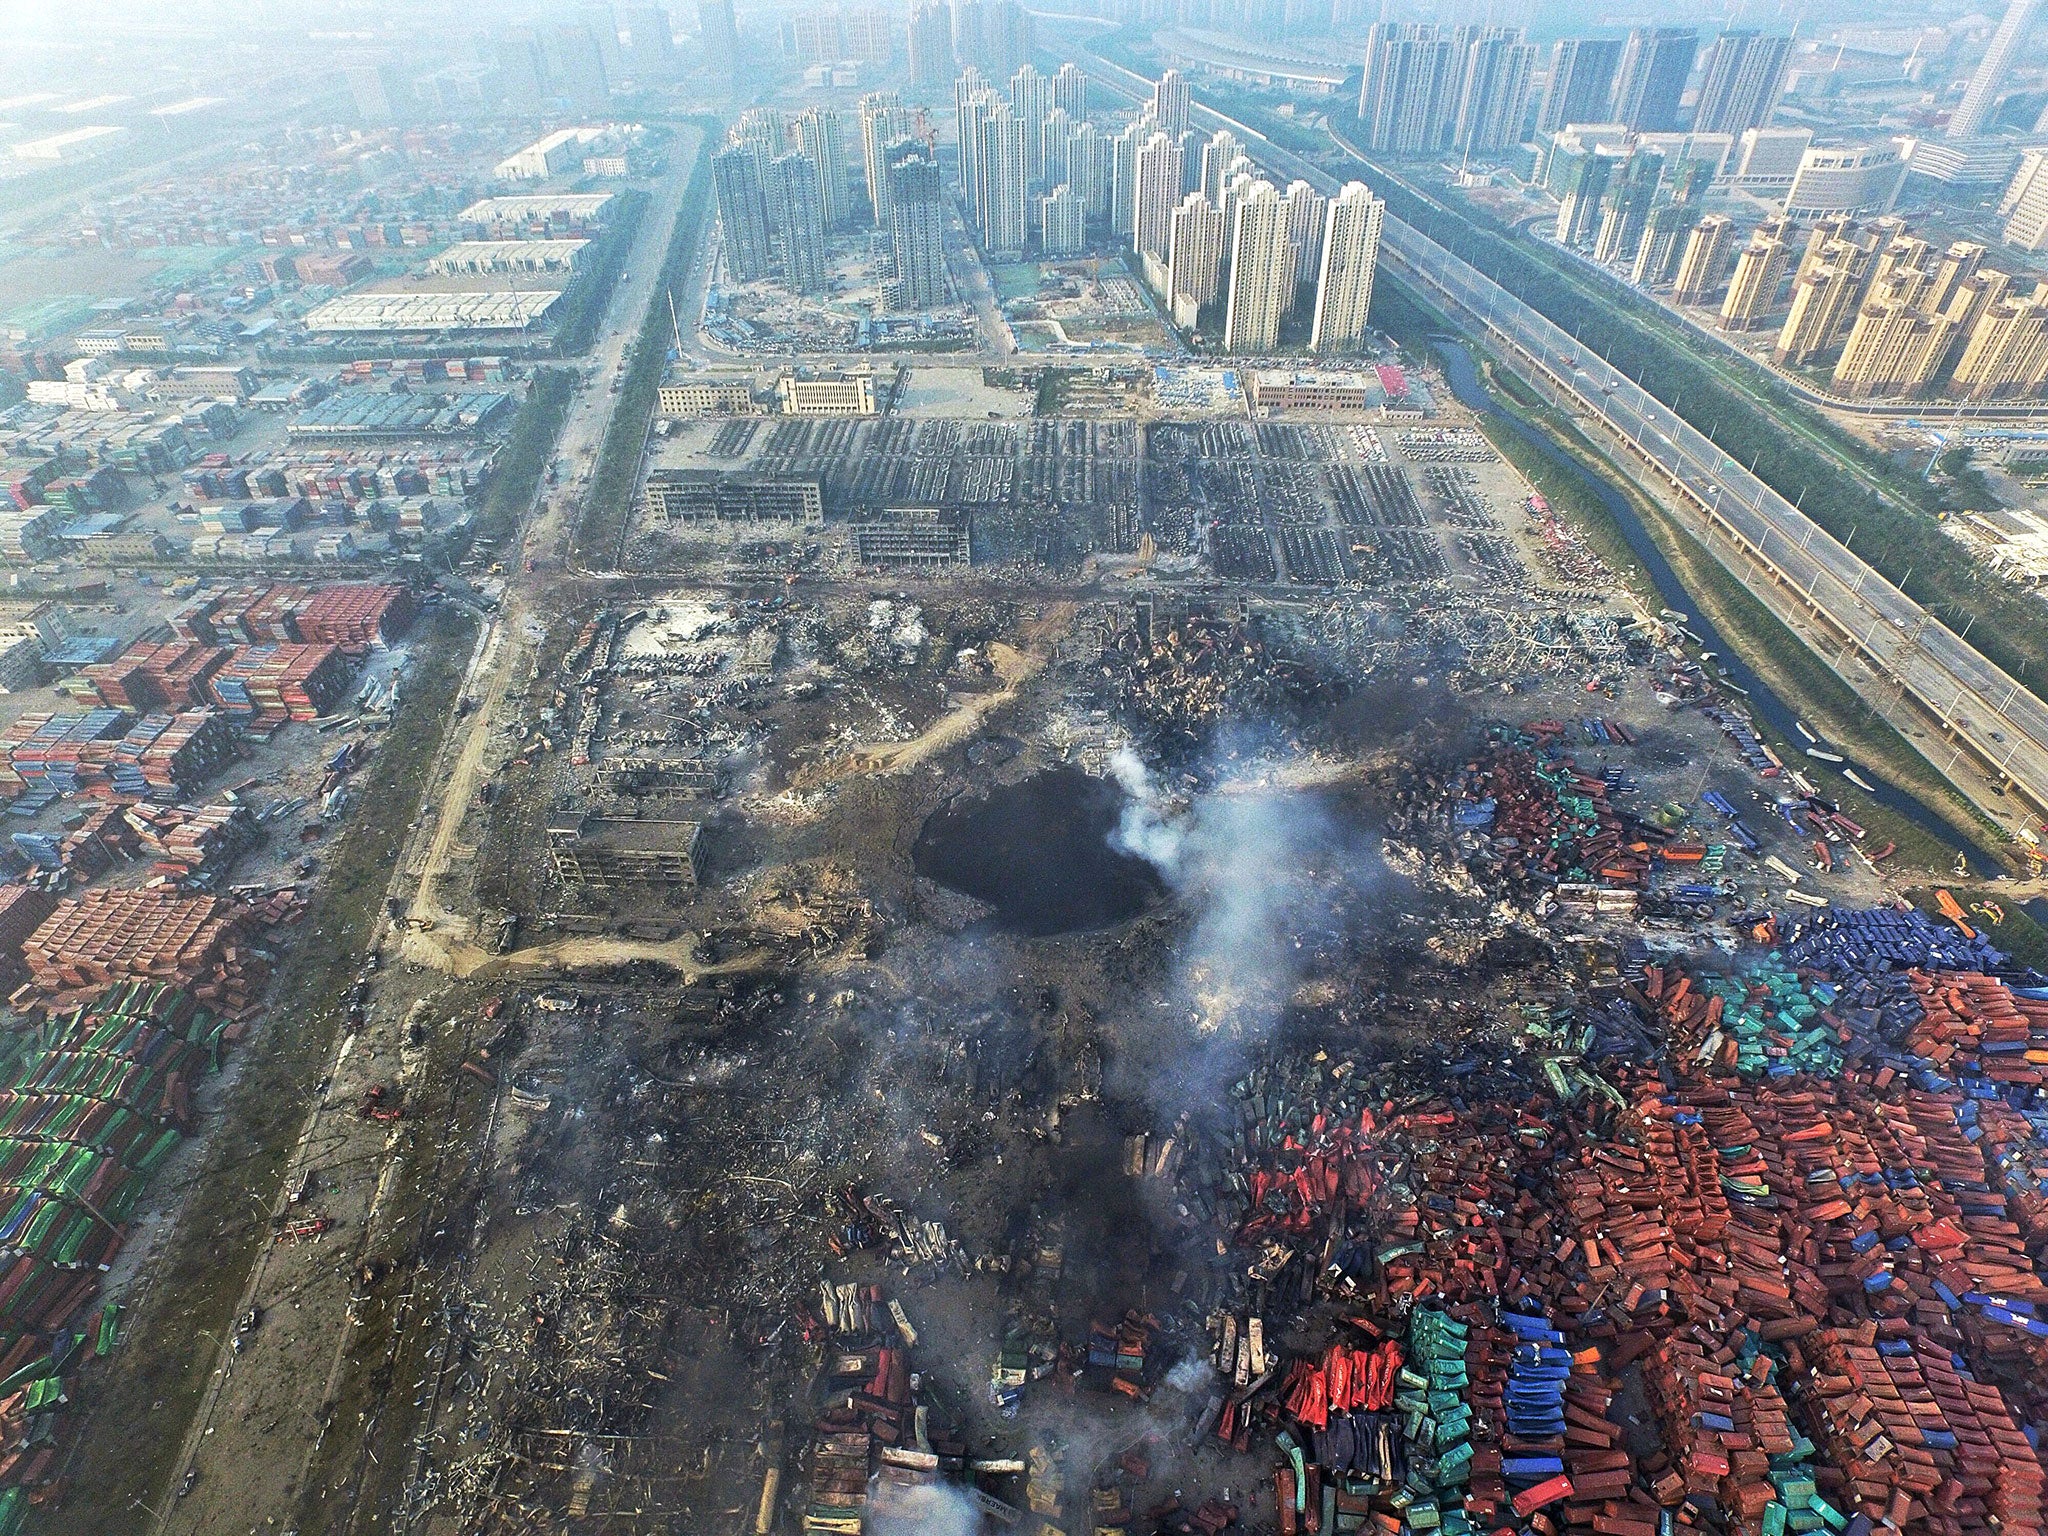 A huge hole in the ground at the north-eastern port city of Tianjin, China. An exclusion zone of 3km has been placed around the site, displacing 6,300 people